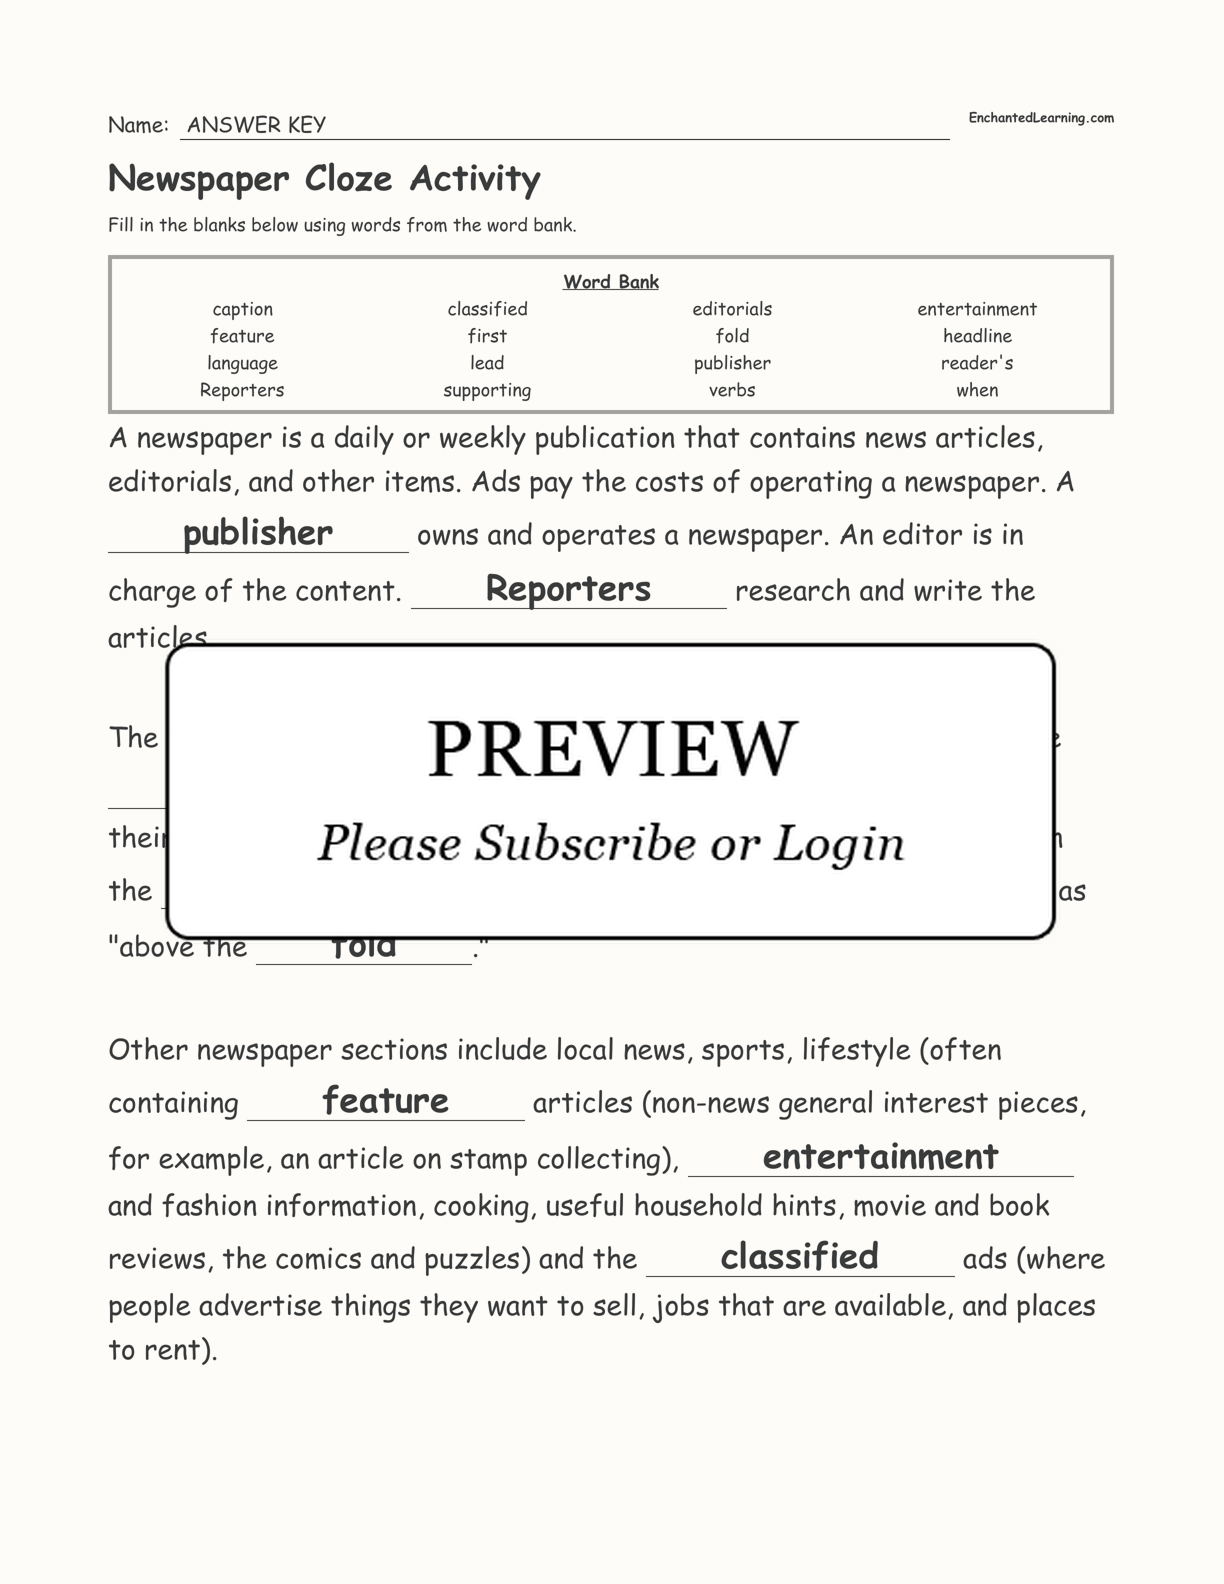 Newspaper Cloze Activity interactive worksheet page 3